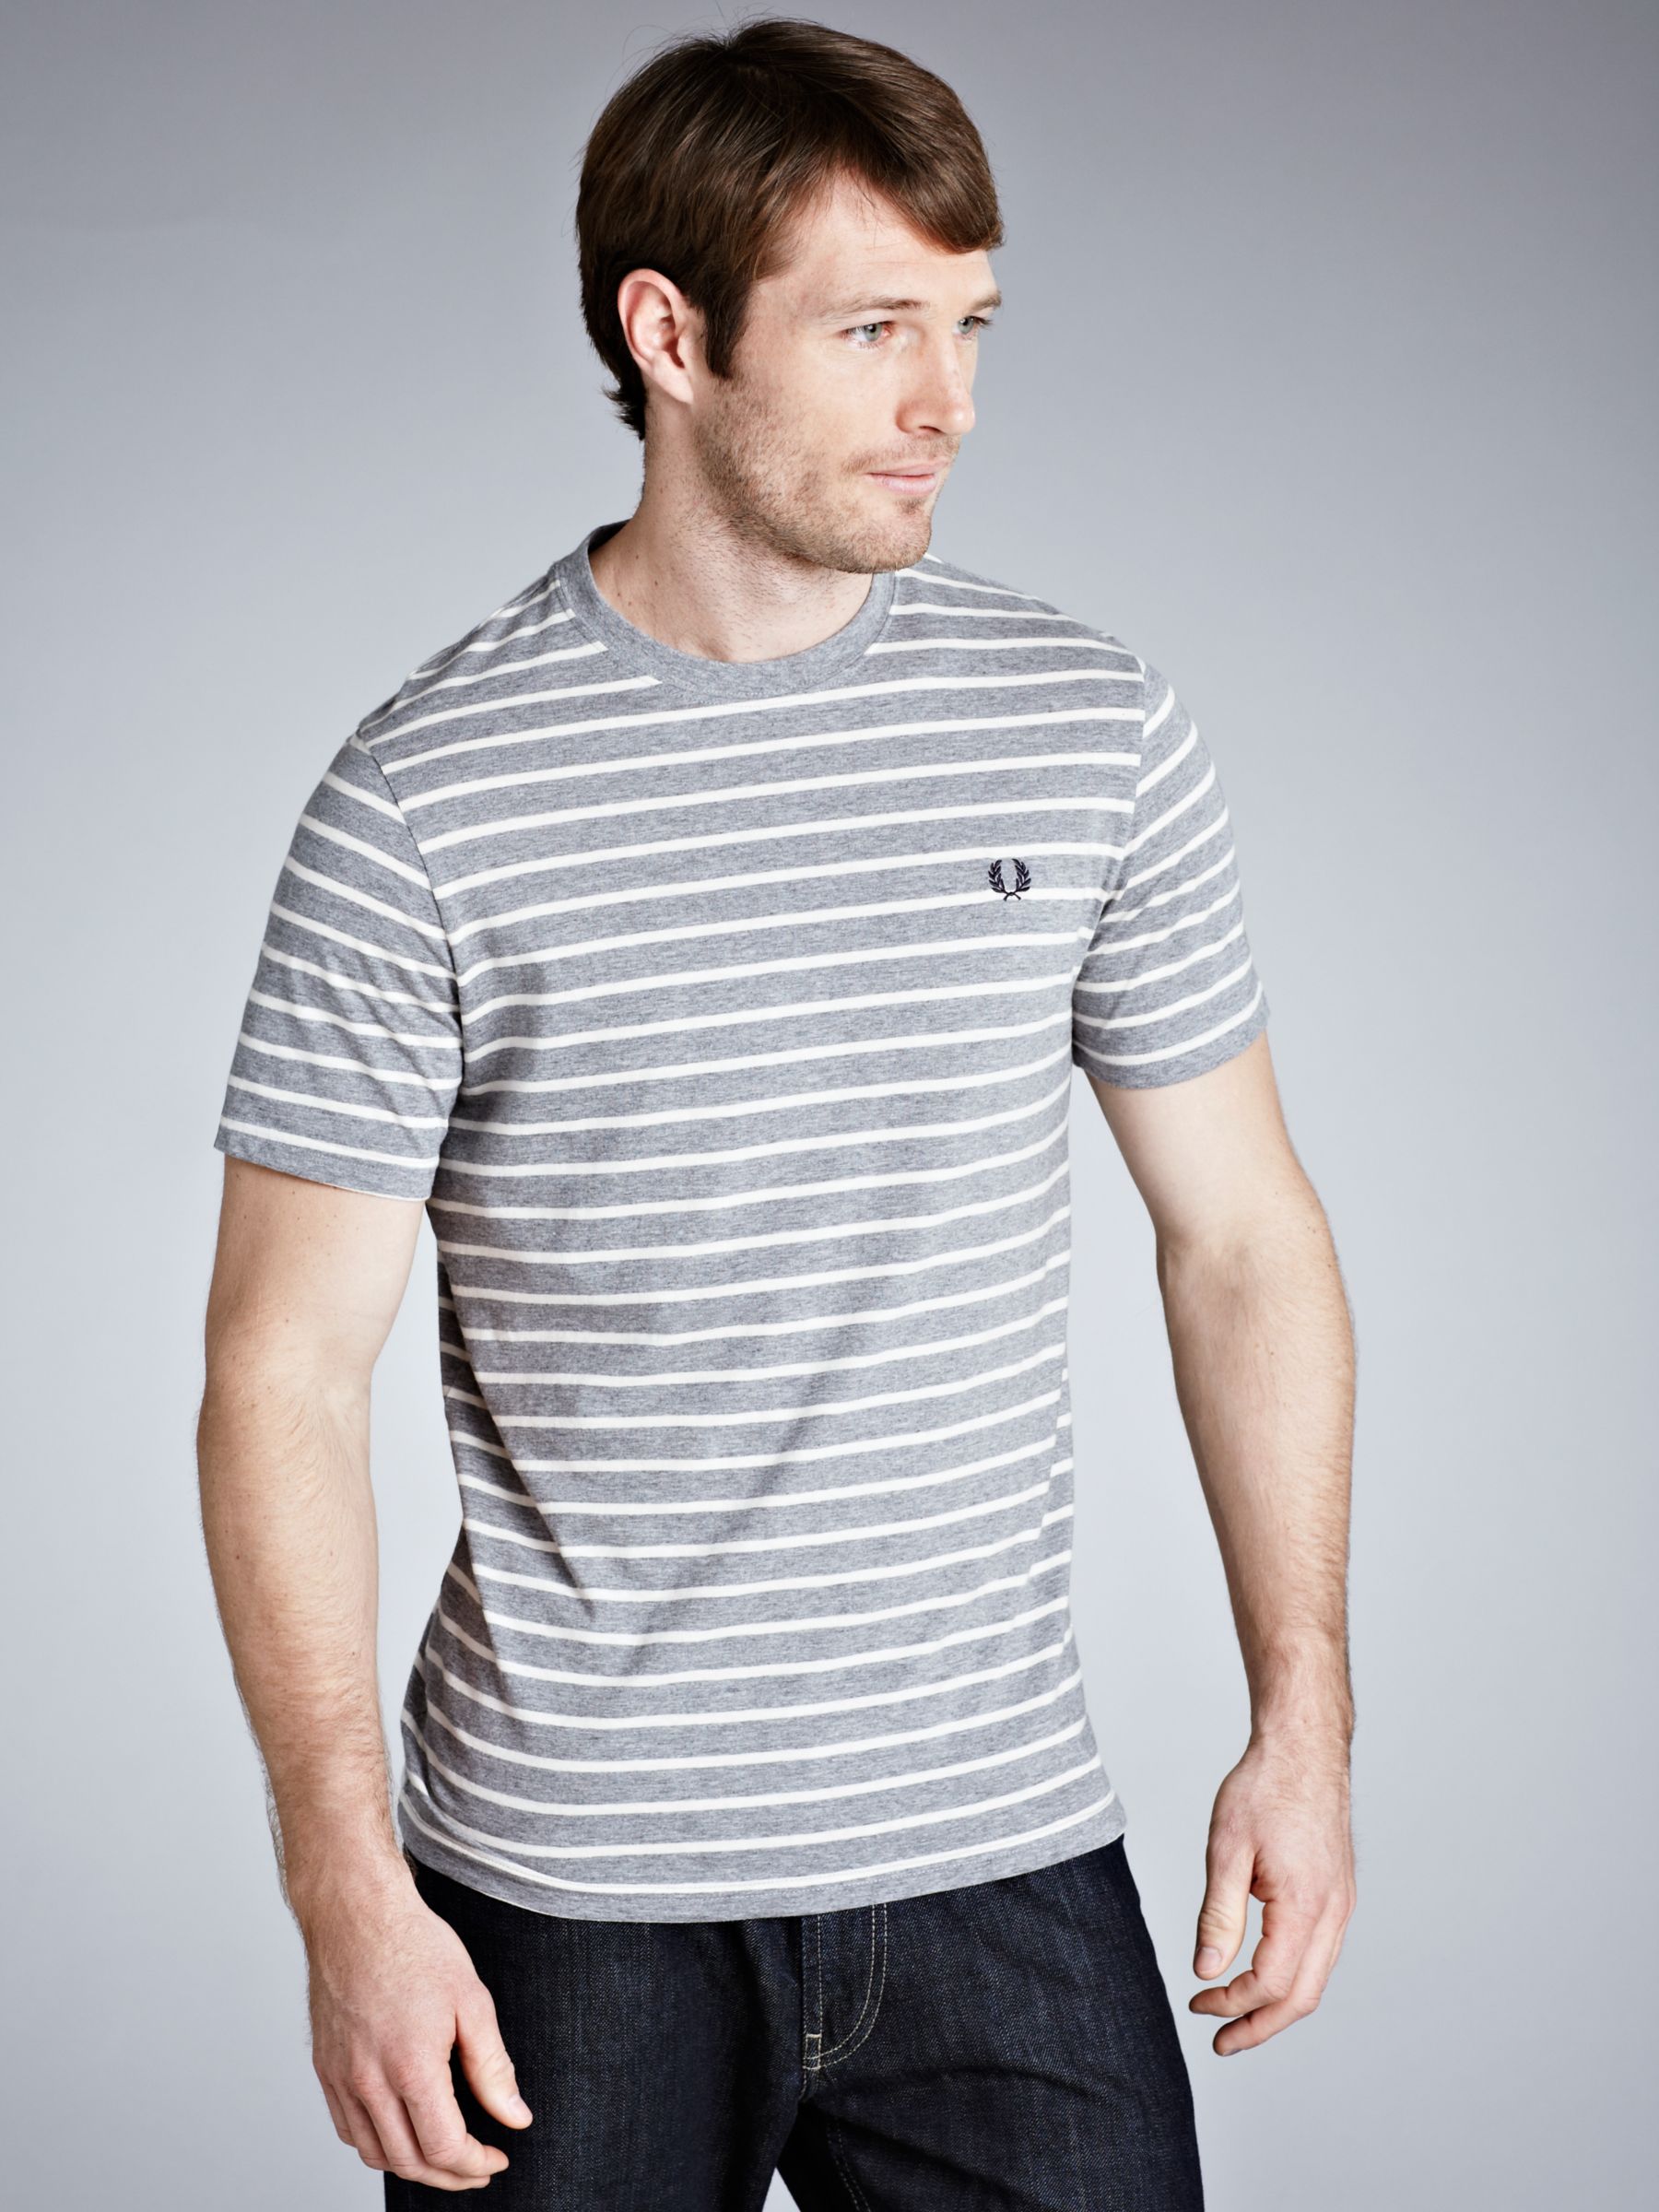 Fred Perry Fine Stripe Short Sleeve T-Shirt, Navy